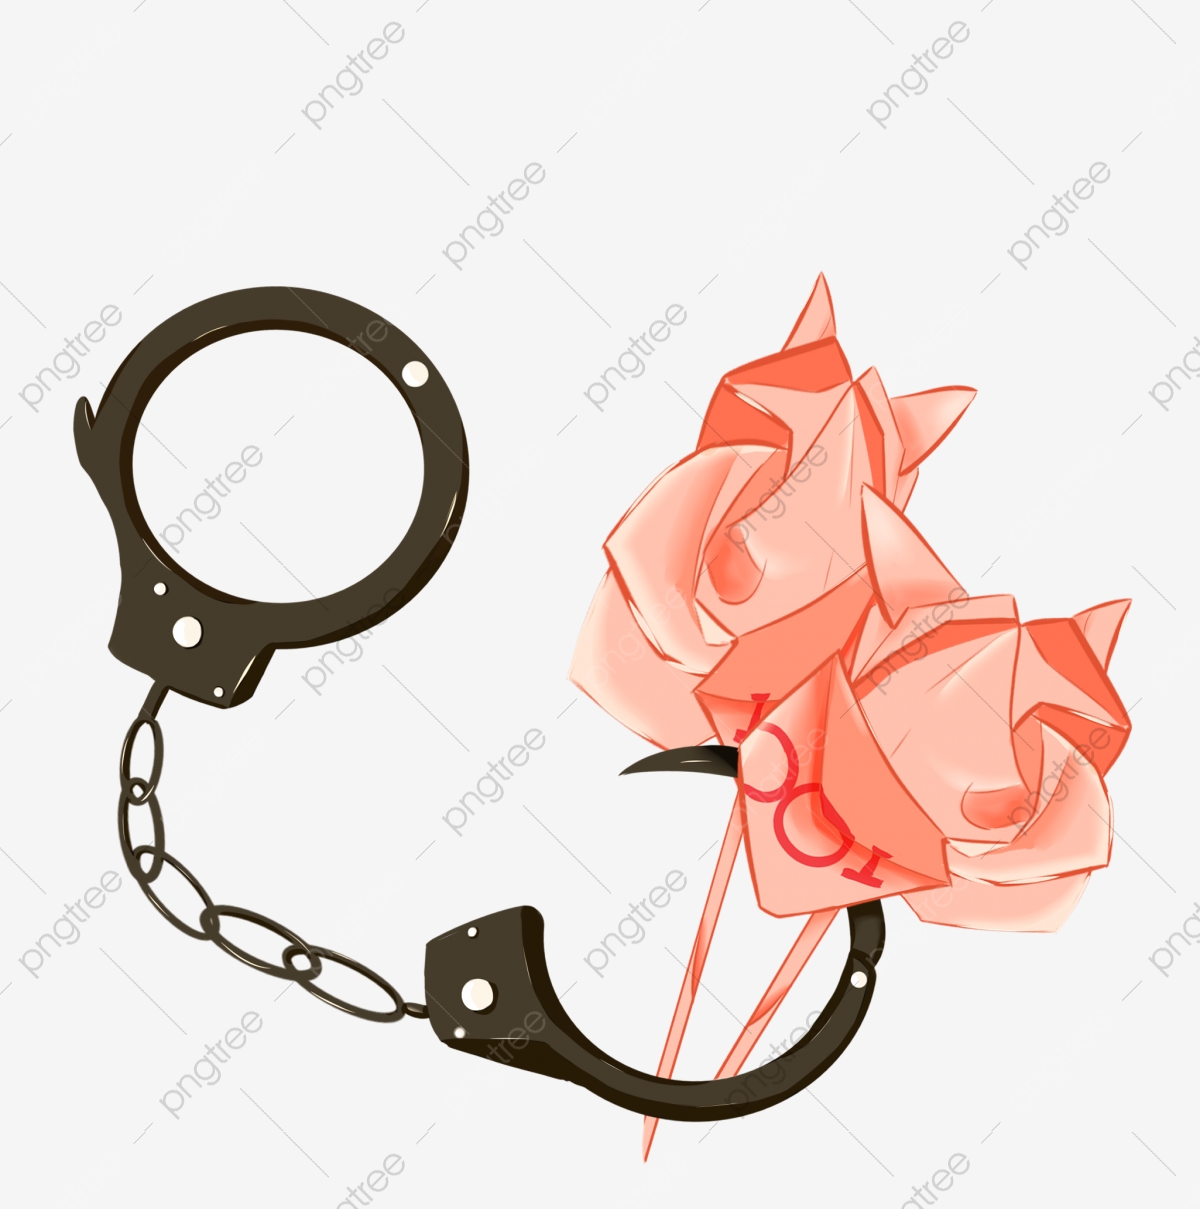 Hand painted png . Handcuffs clipart constraint